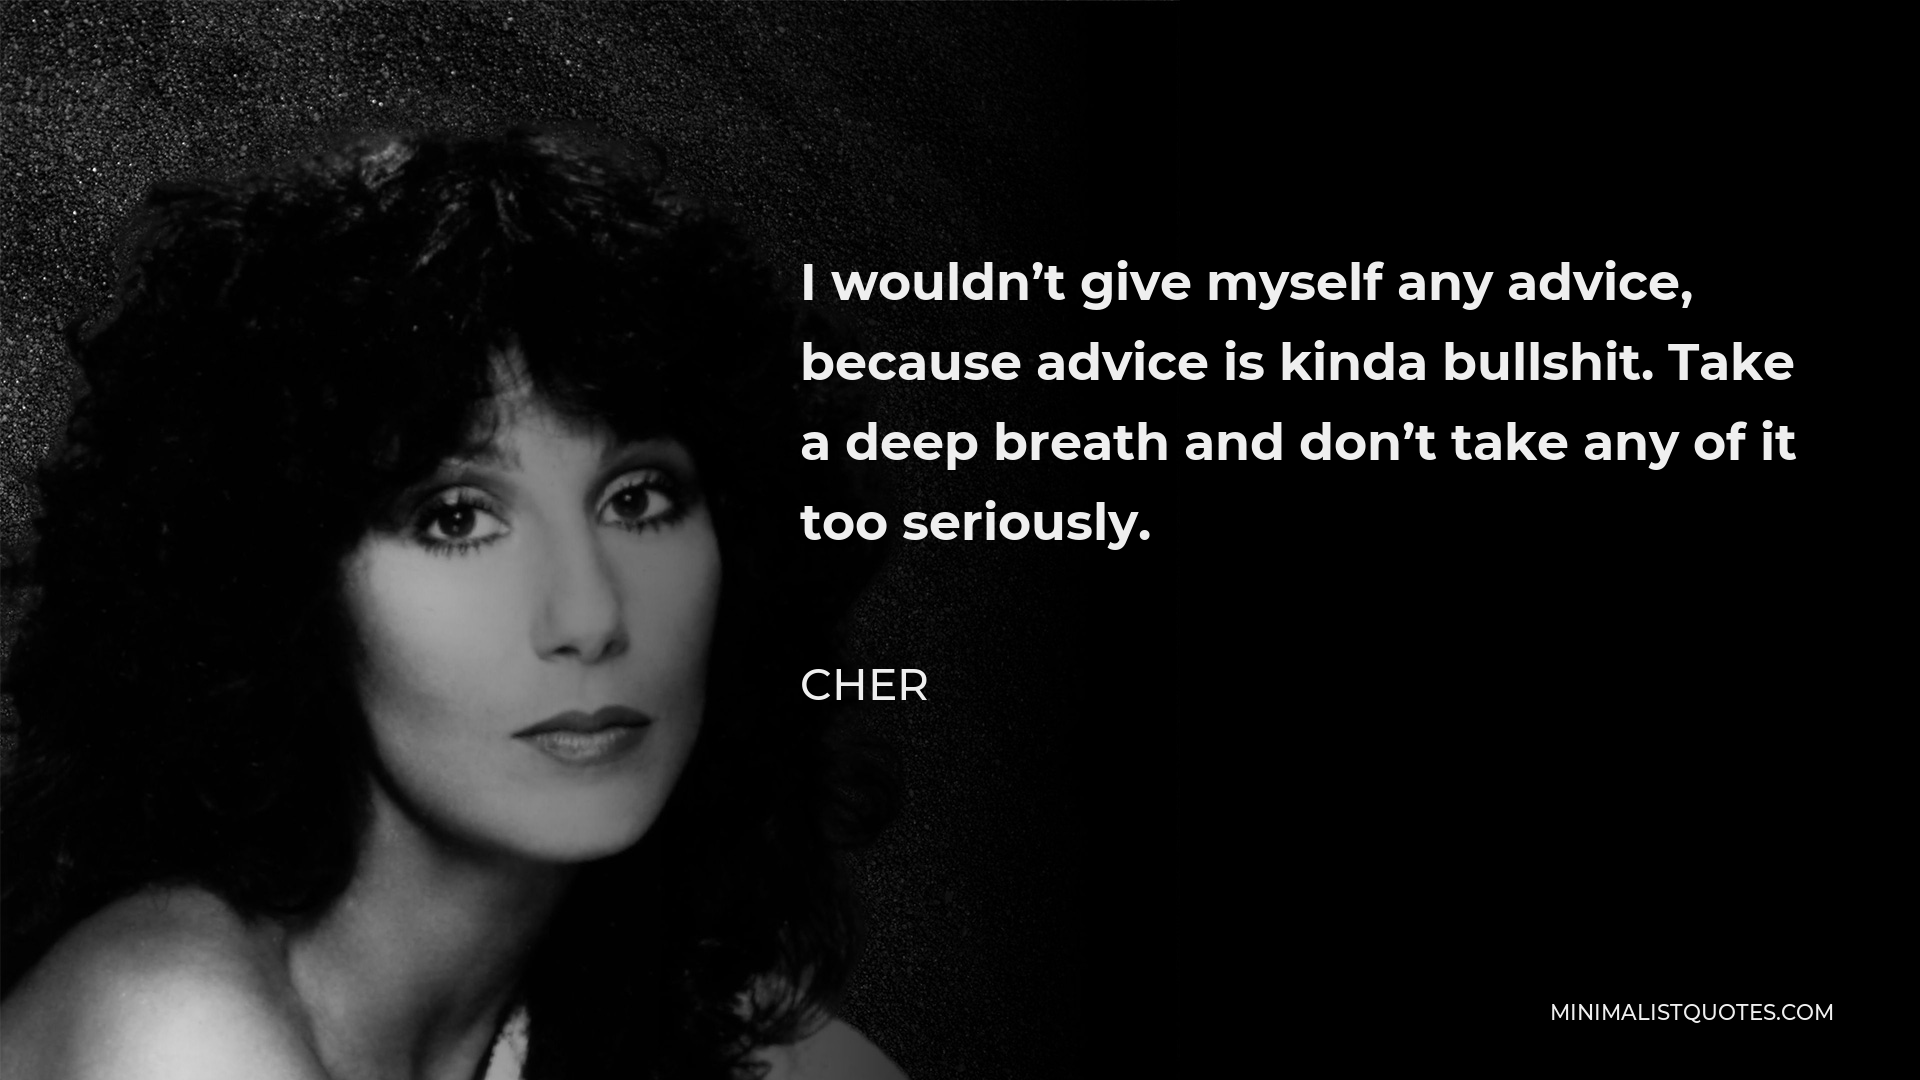 Cher Quote - I wouldn’t give myself any advice, because advice is kinda bullshit. Take a deep breath and don’t take any of it too seriously.